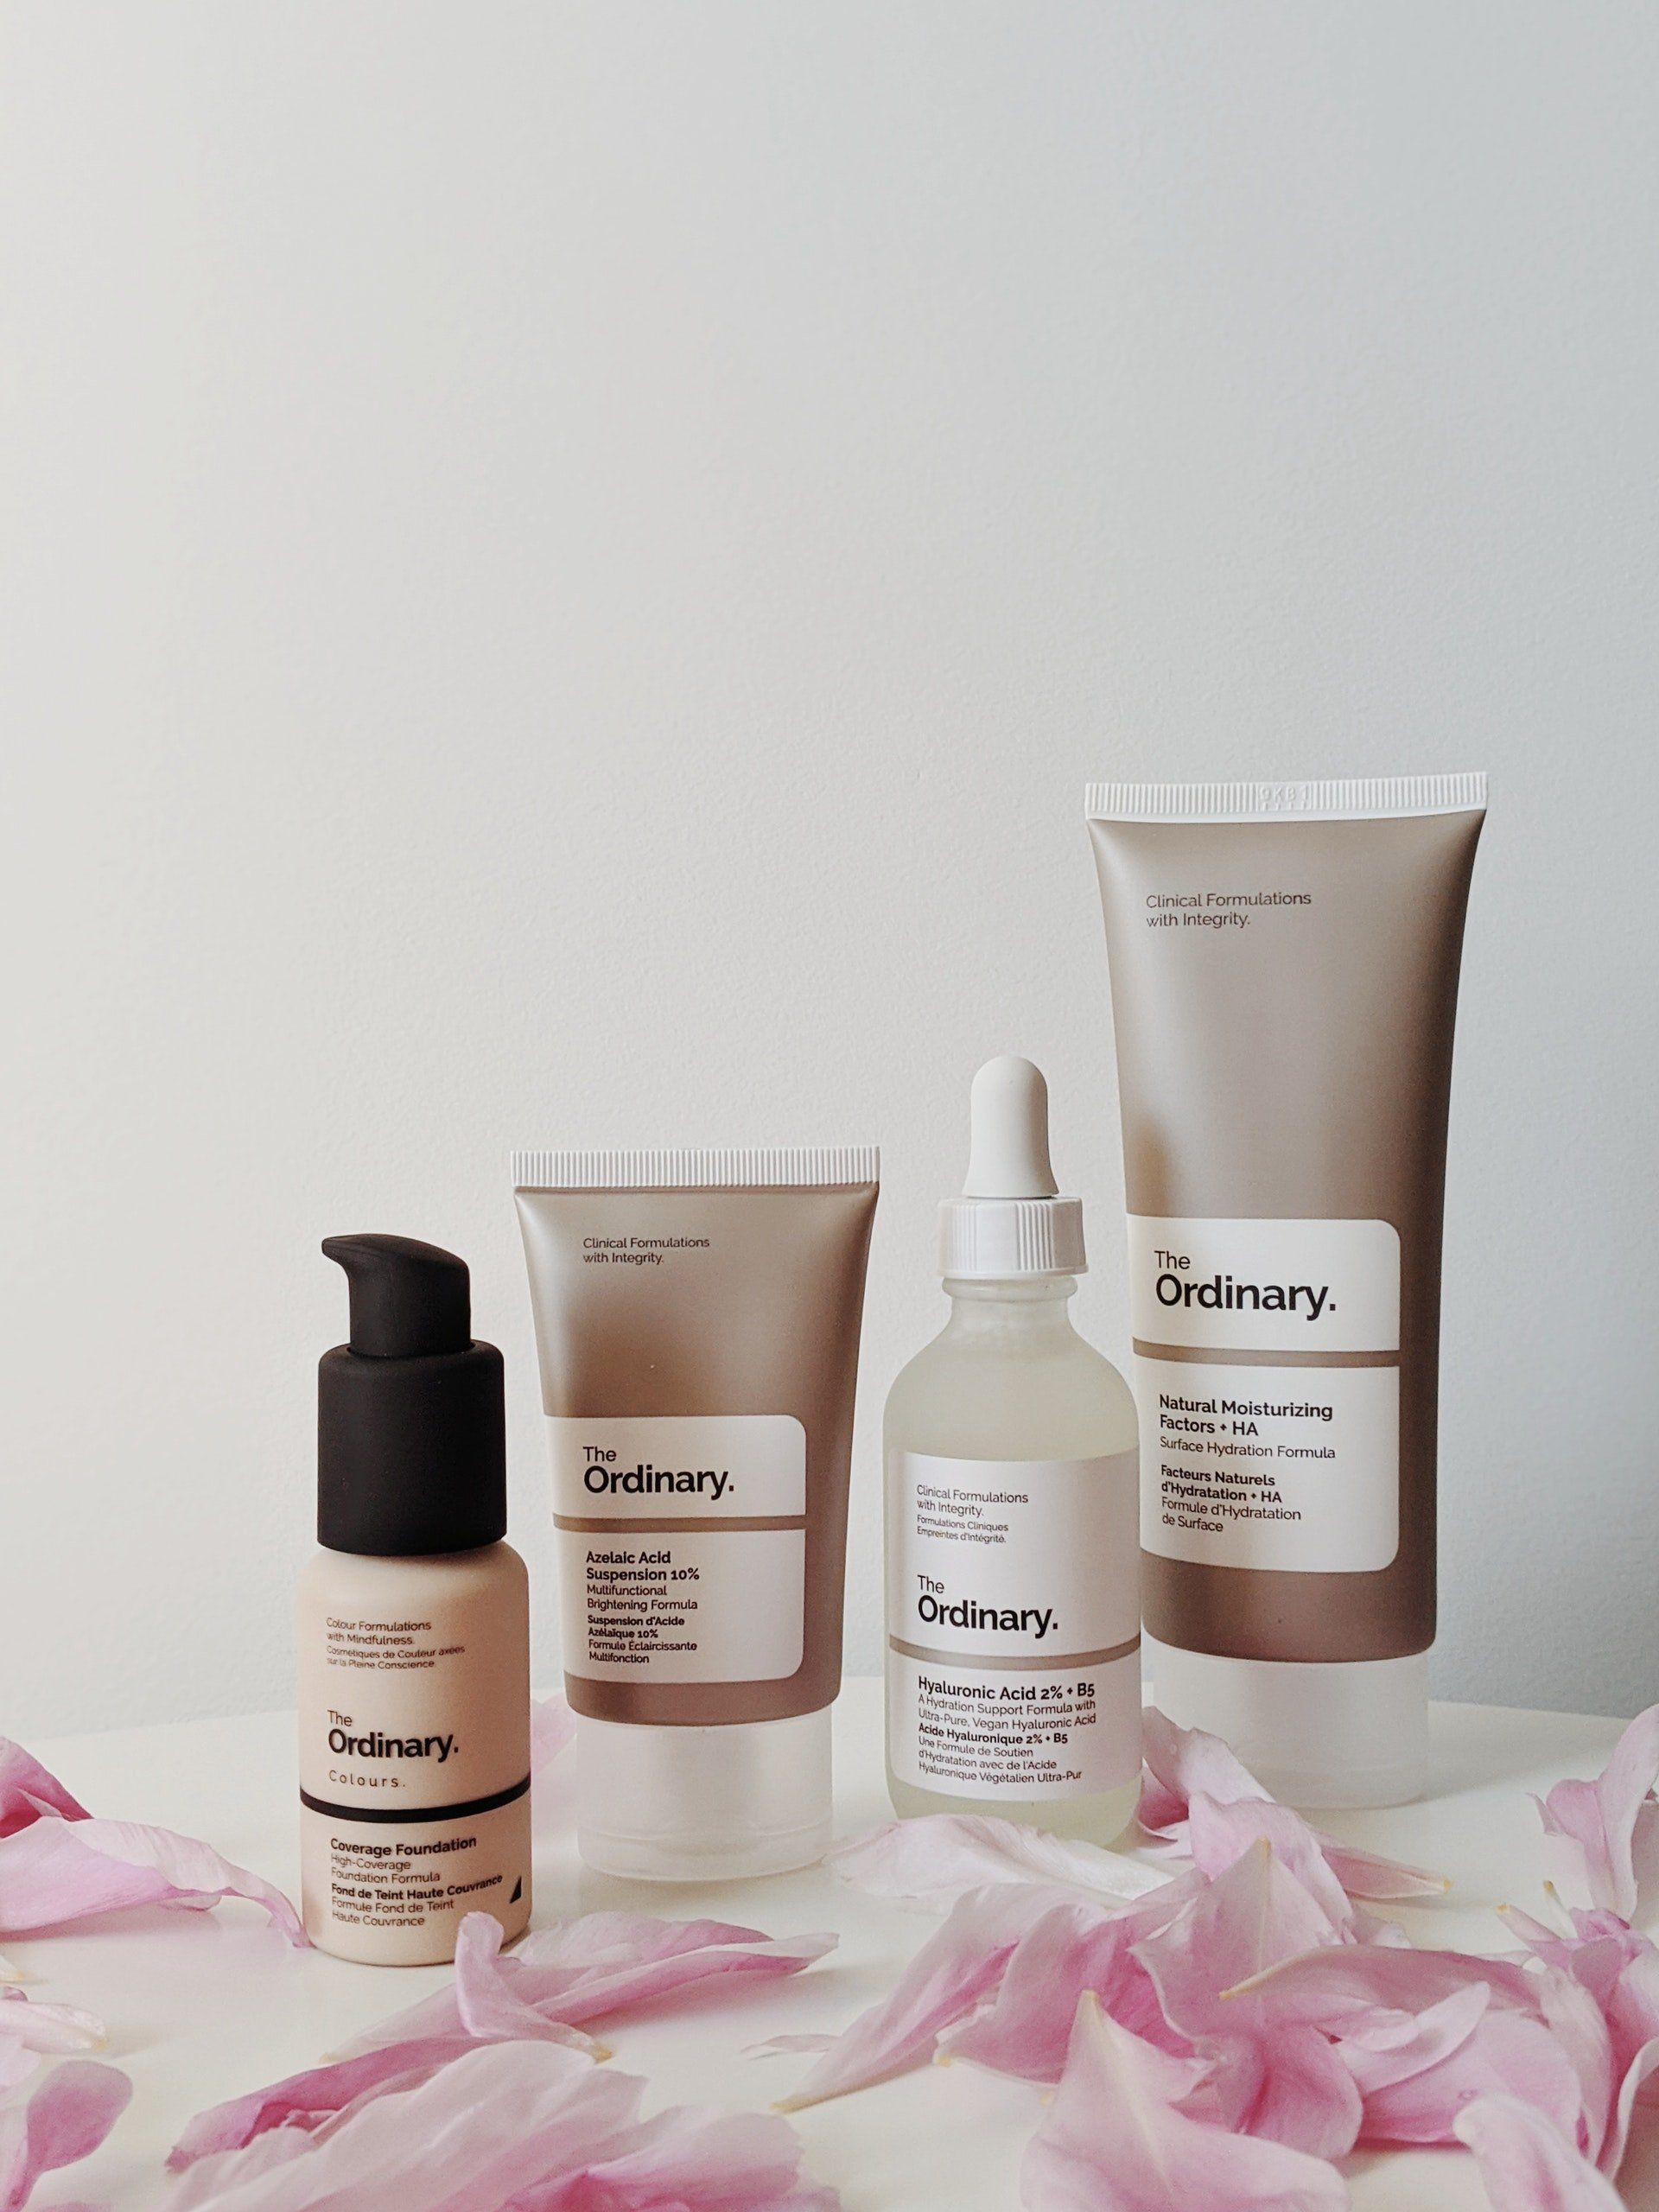 Three bottles of the ordinary cosmetics are sitting on a table surrounded by pink petals.